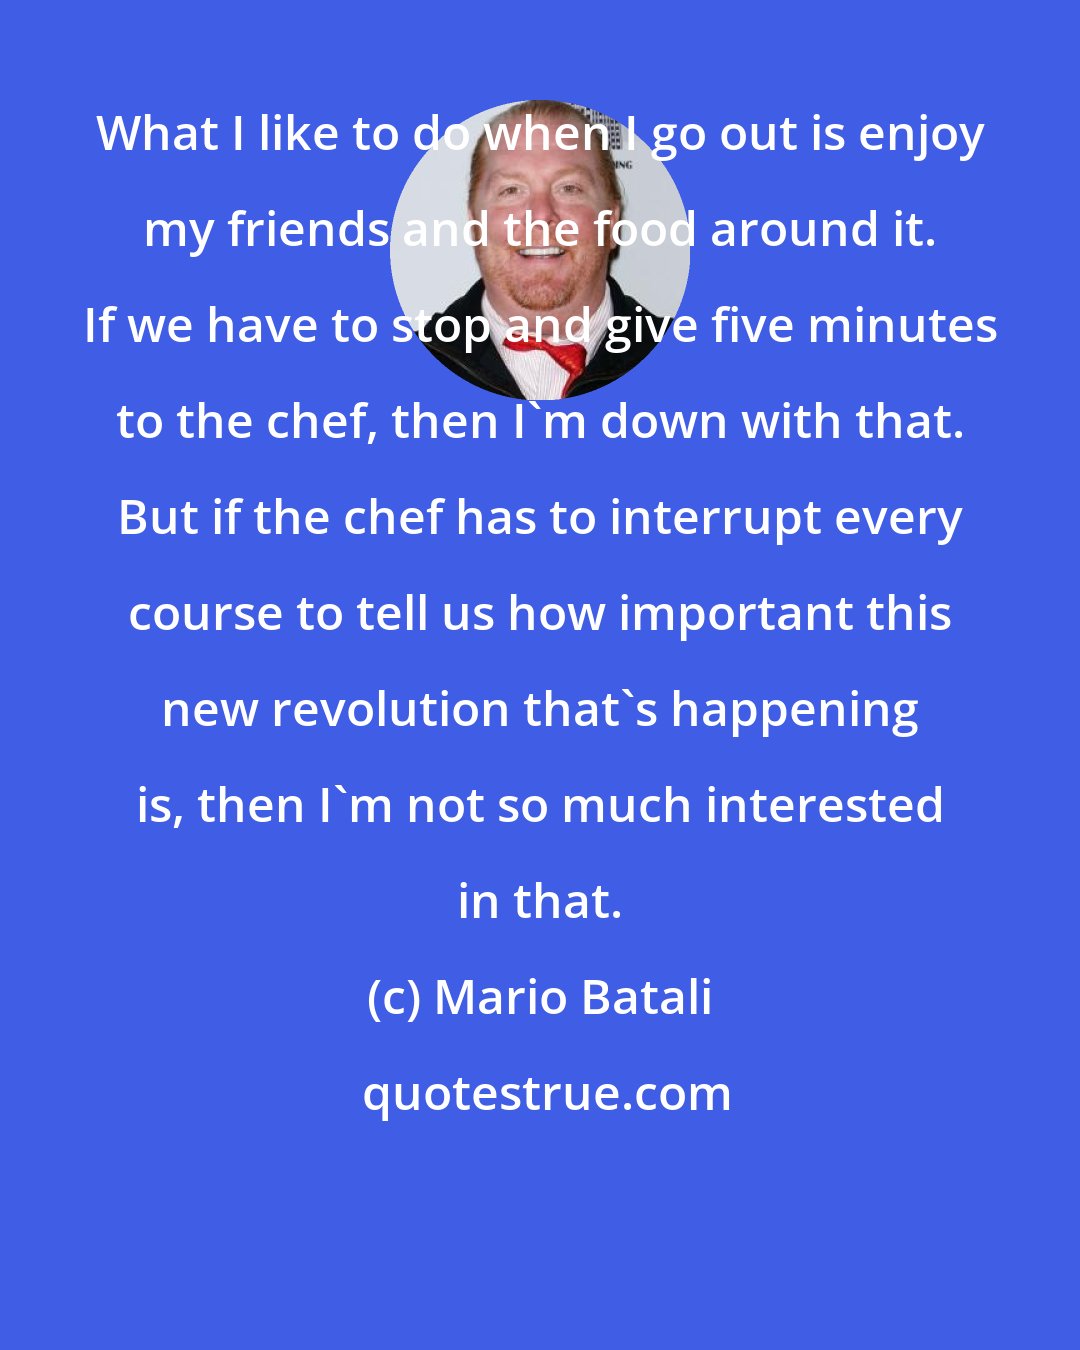 Mario Batali: What I like to do when I go out is enjoy my friends and the food around it. If we have to stop and give five minutes to the chef, then I'm down with that. But if the chef has to interrupt every course to tell us how important this new revolution that's happening is, then I'm not so much interested in that.